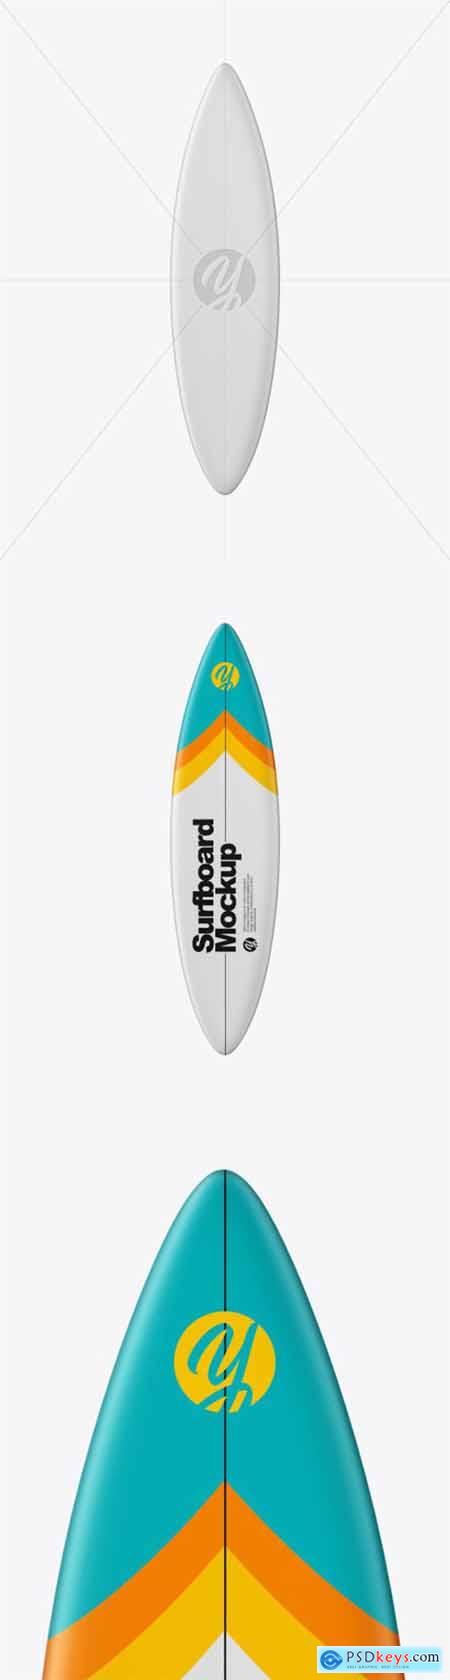 Download Surfboard Mockup Front View 51856 Free Download Photoshop Vector Stock Image Via Torrent Zippyshare From Psdkeys Com